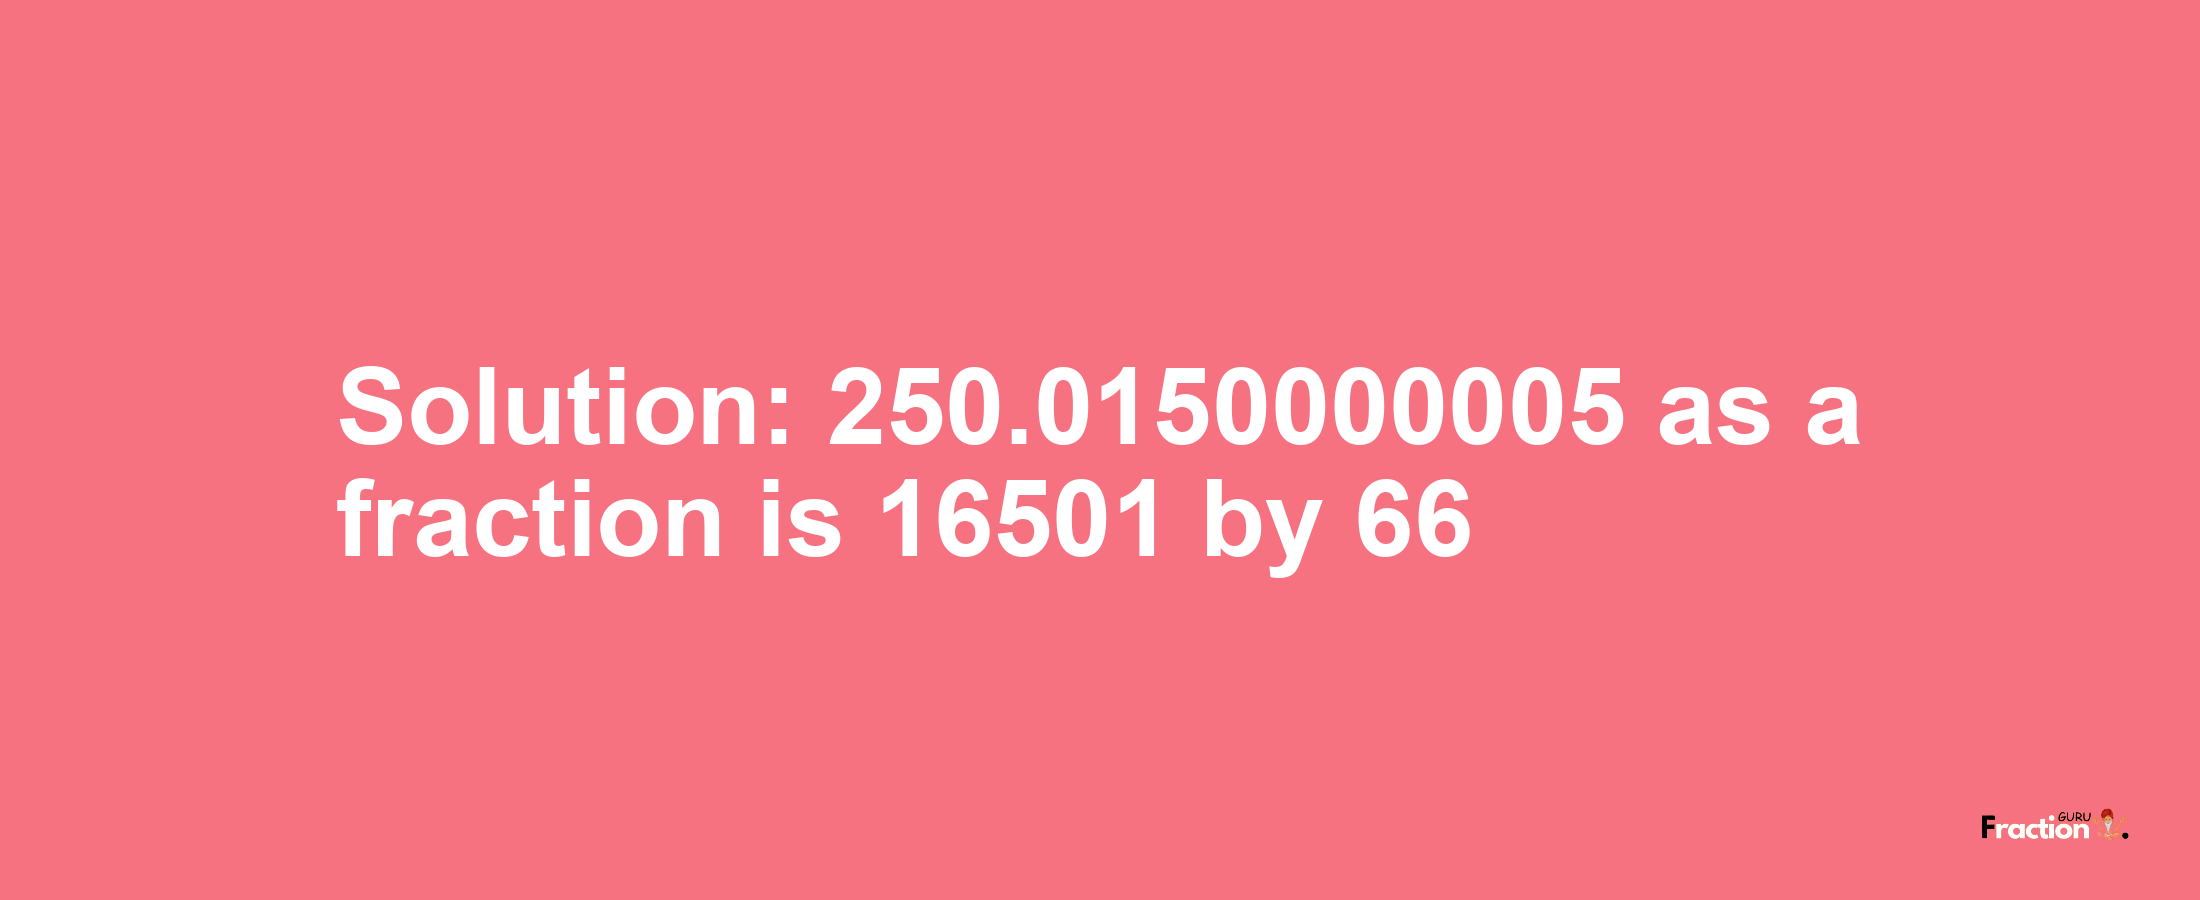 Solution:250.0150000005 as a fraction is 16501/66